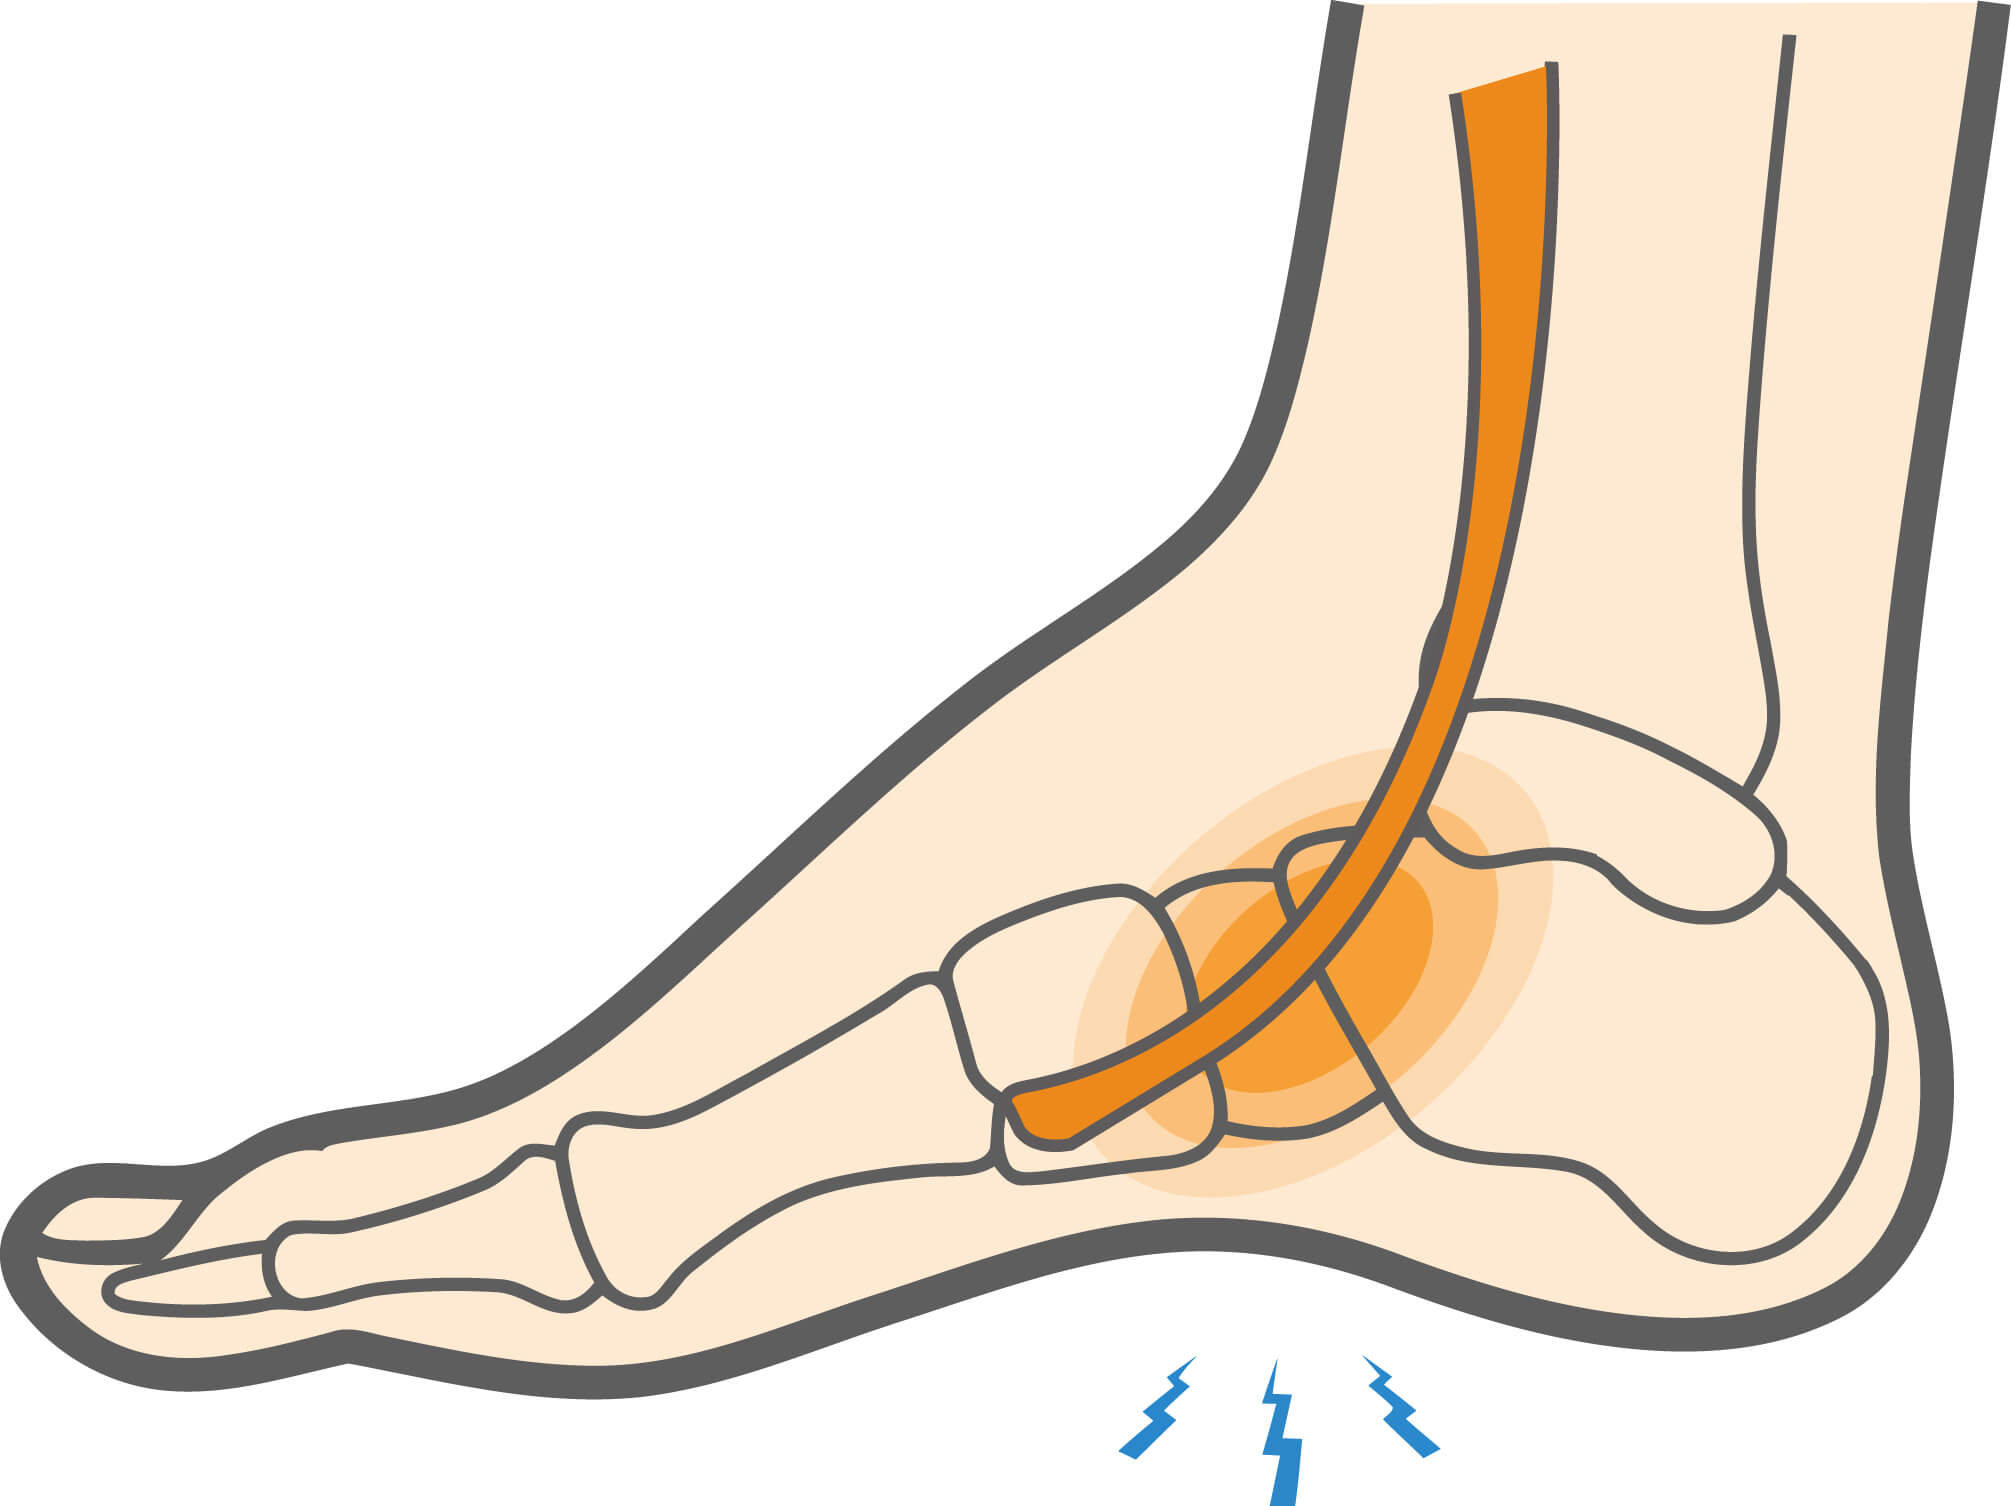 Ankle Sprains: How Physical Therapy Can Help! < Hampton Physical Therapy